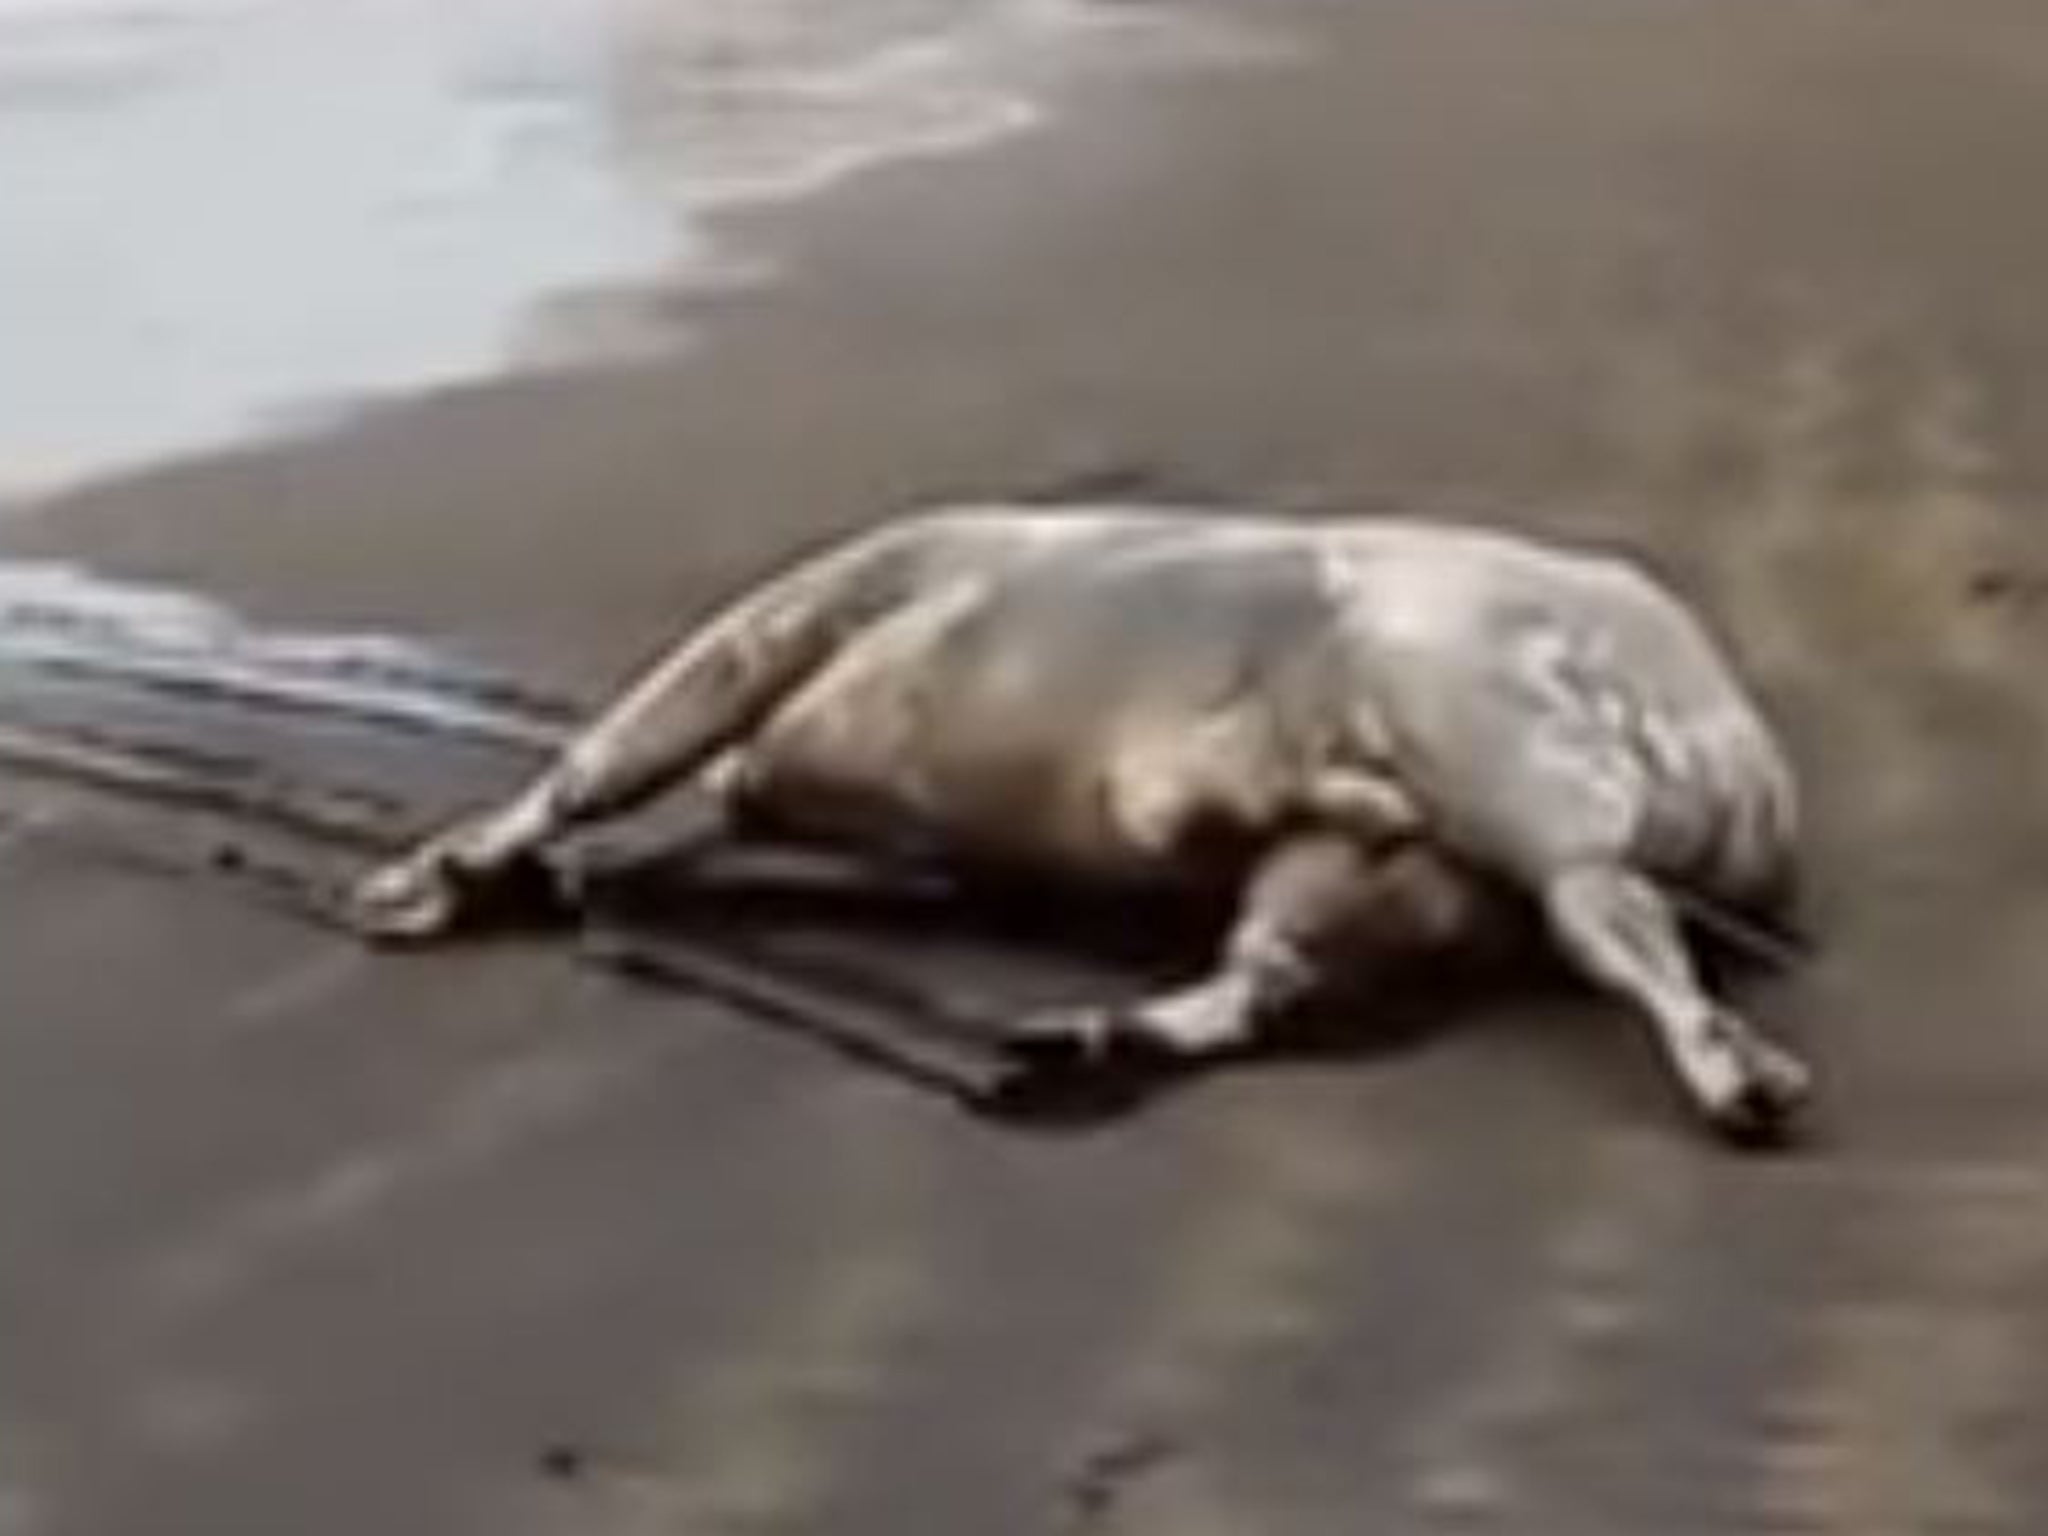 Footage showed the decomposing remains on a beach